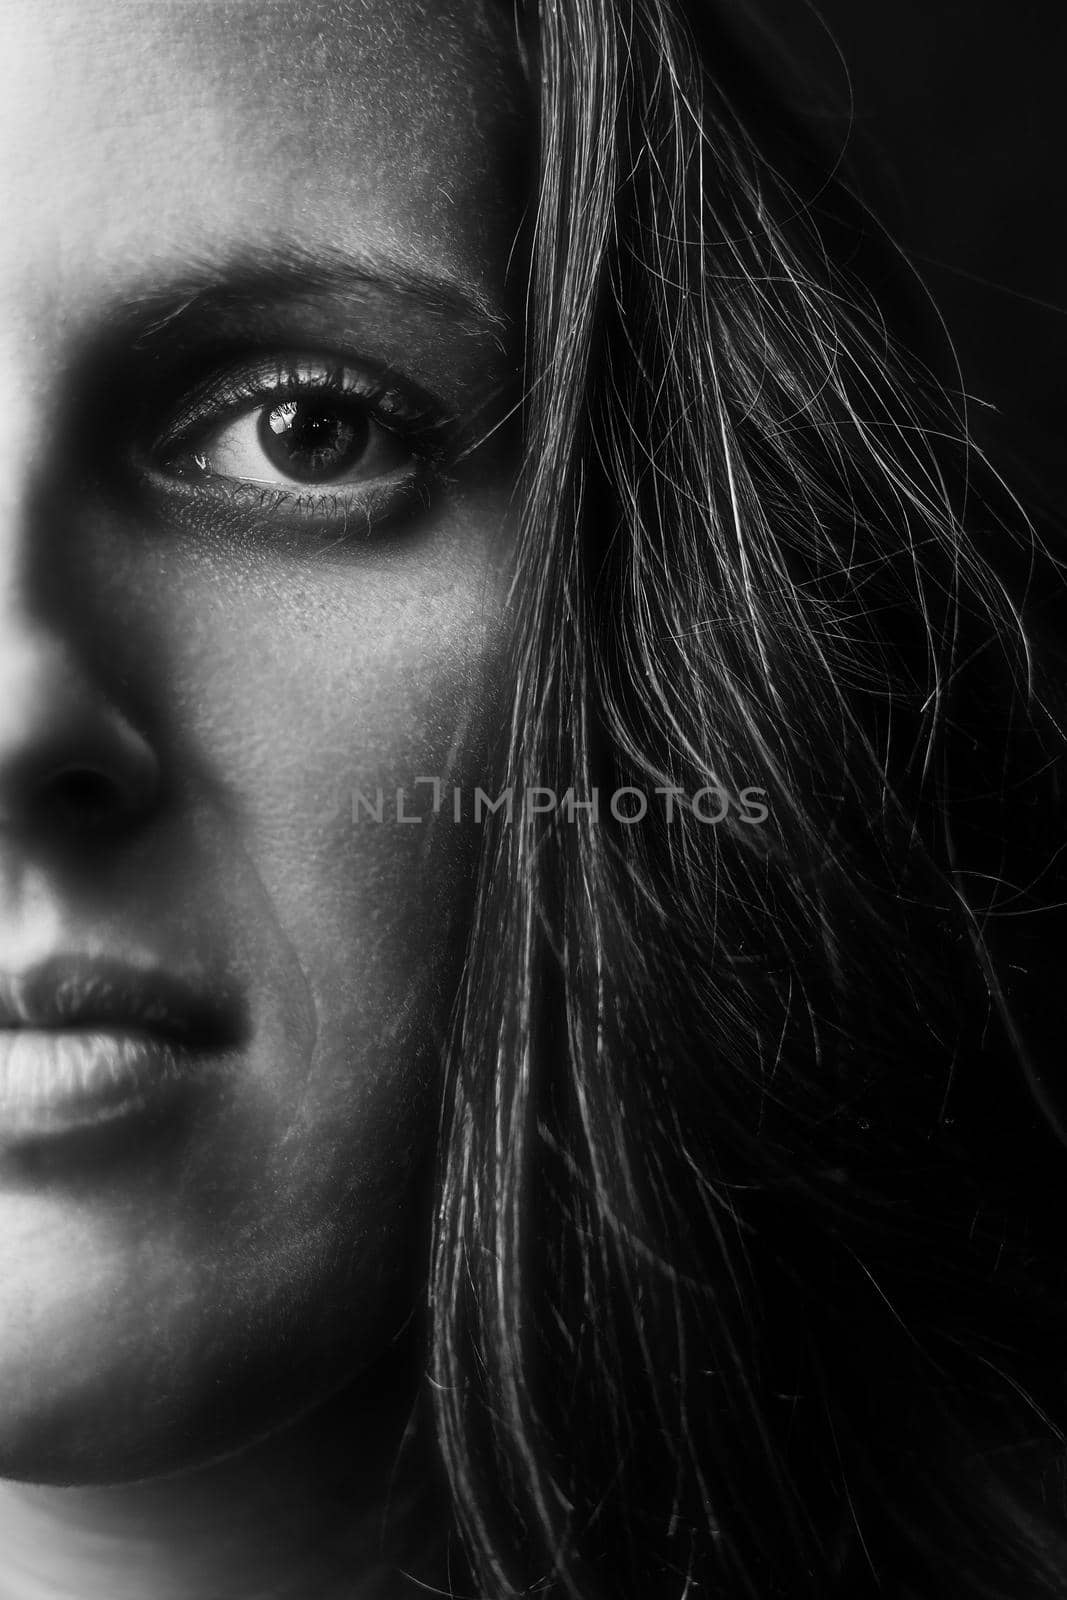 Creative close-up portrait of a pretty young girl, black background